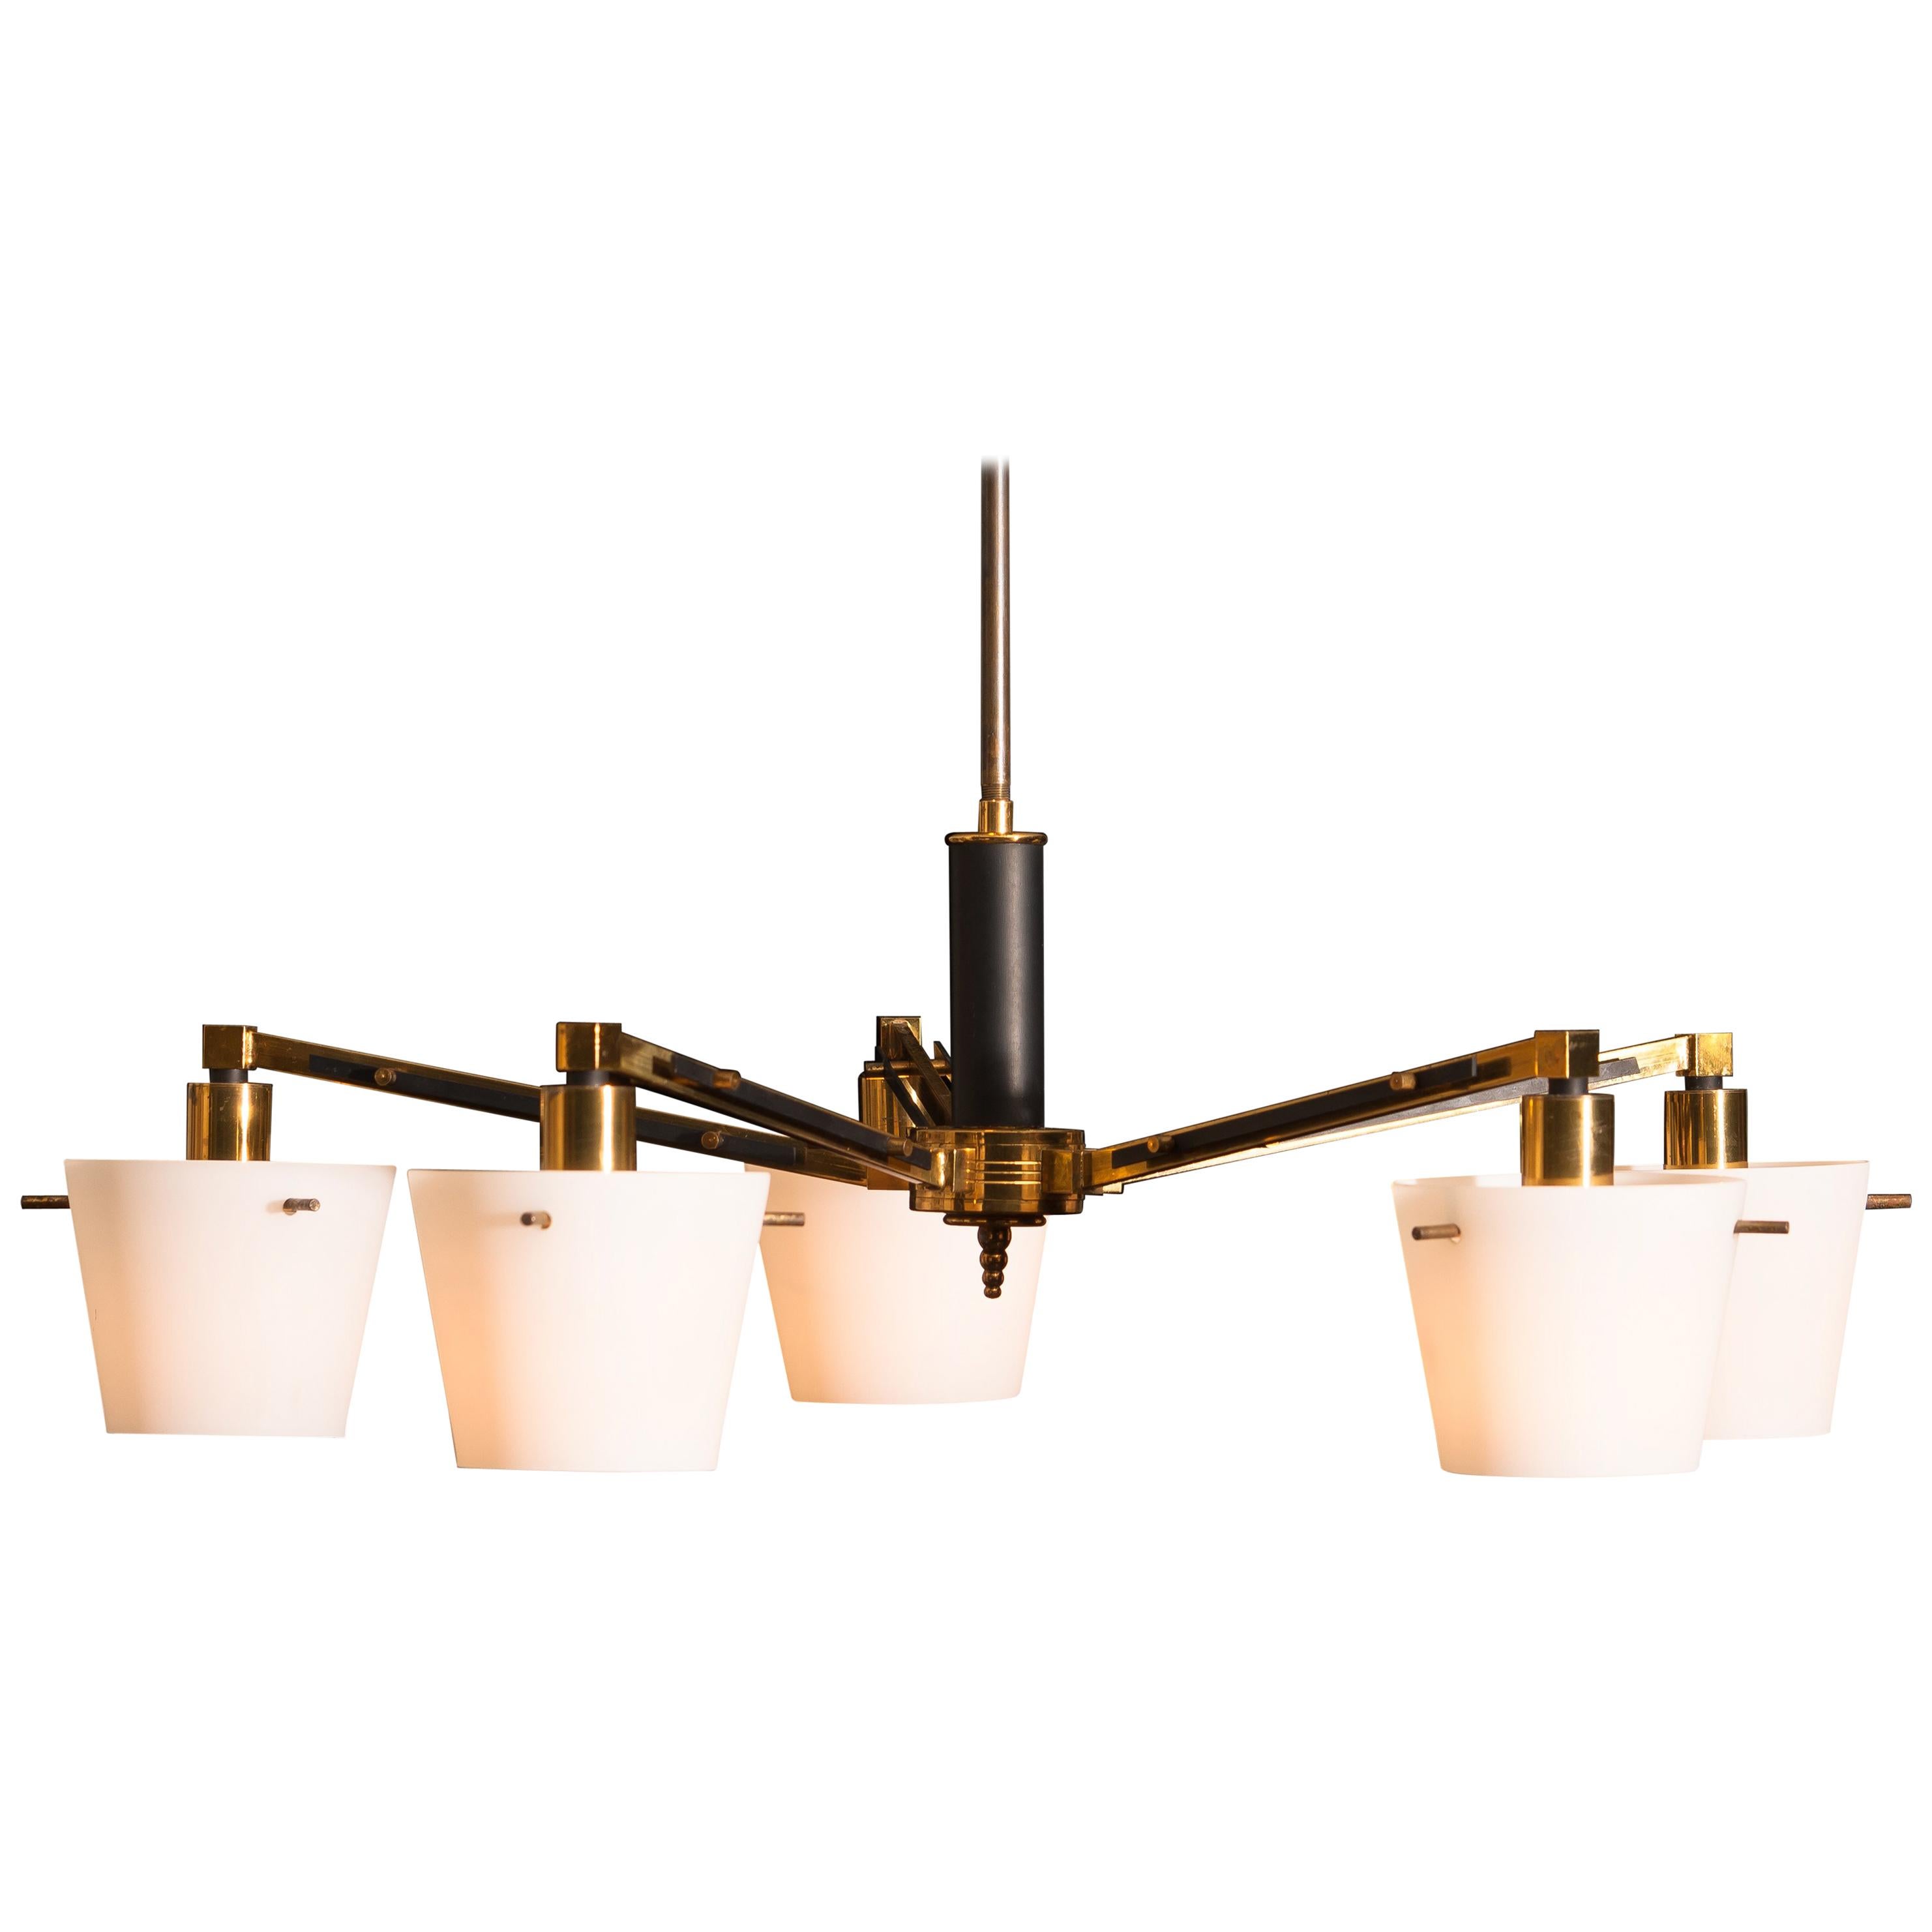 1950s, Brass Chandelier with Frosted with Glass Shades by Stilnovo, Italy 1